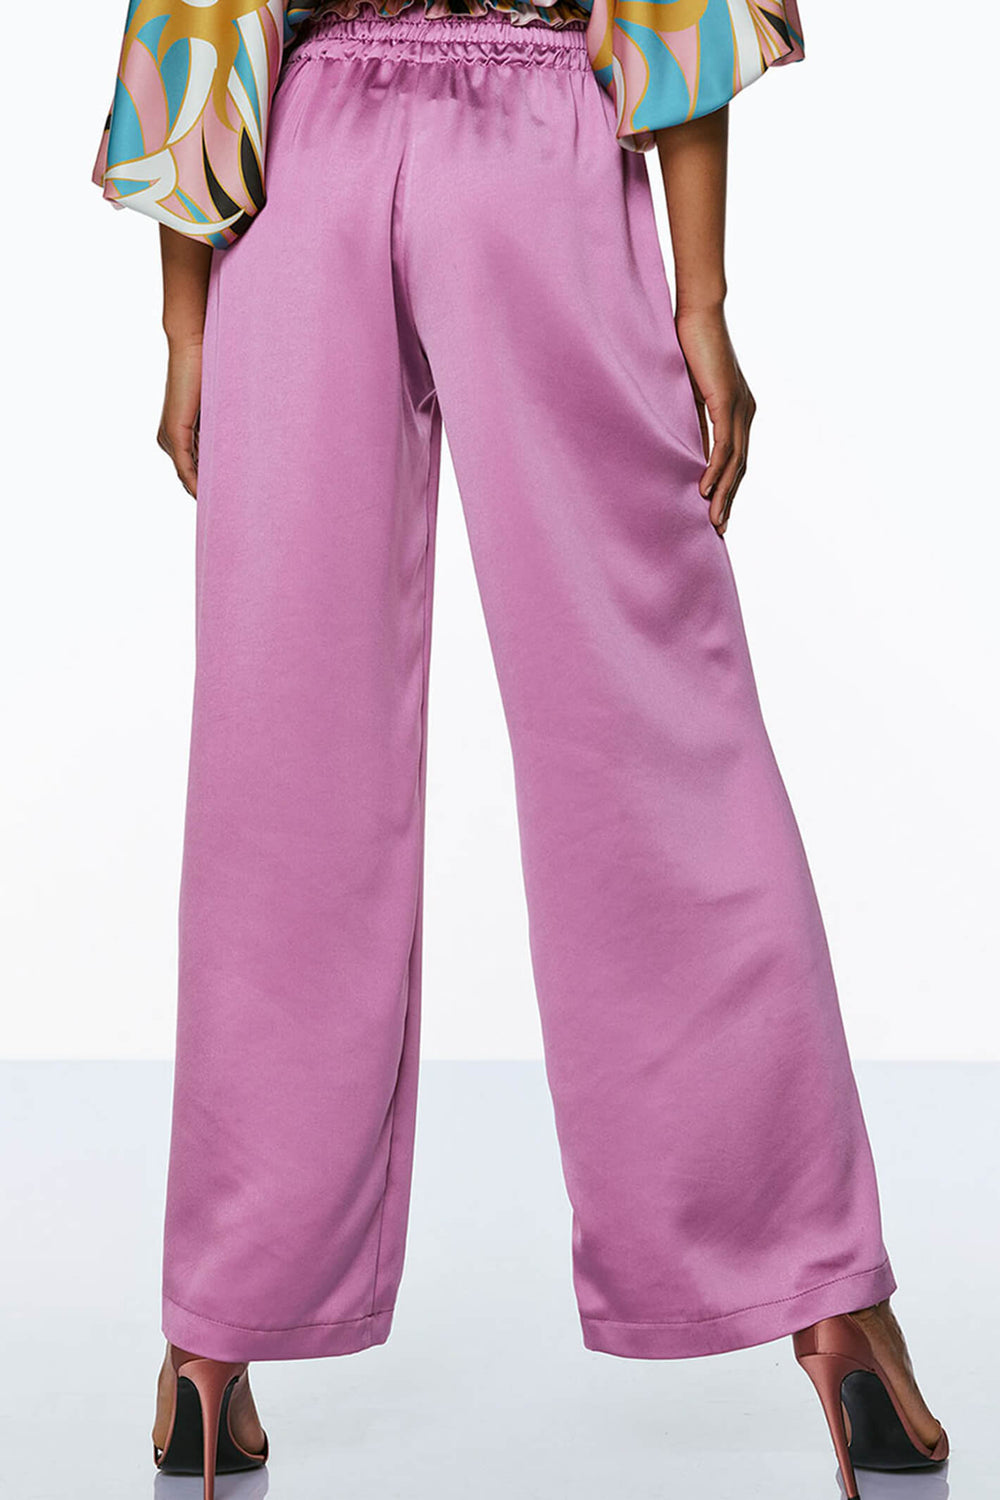 Access Fashion 5036-134 Grape Pink Satin Wide Leg Trousers - Experience Boutique